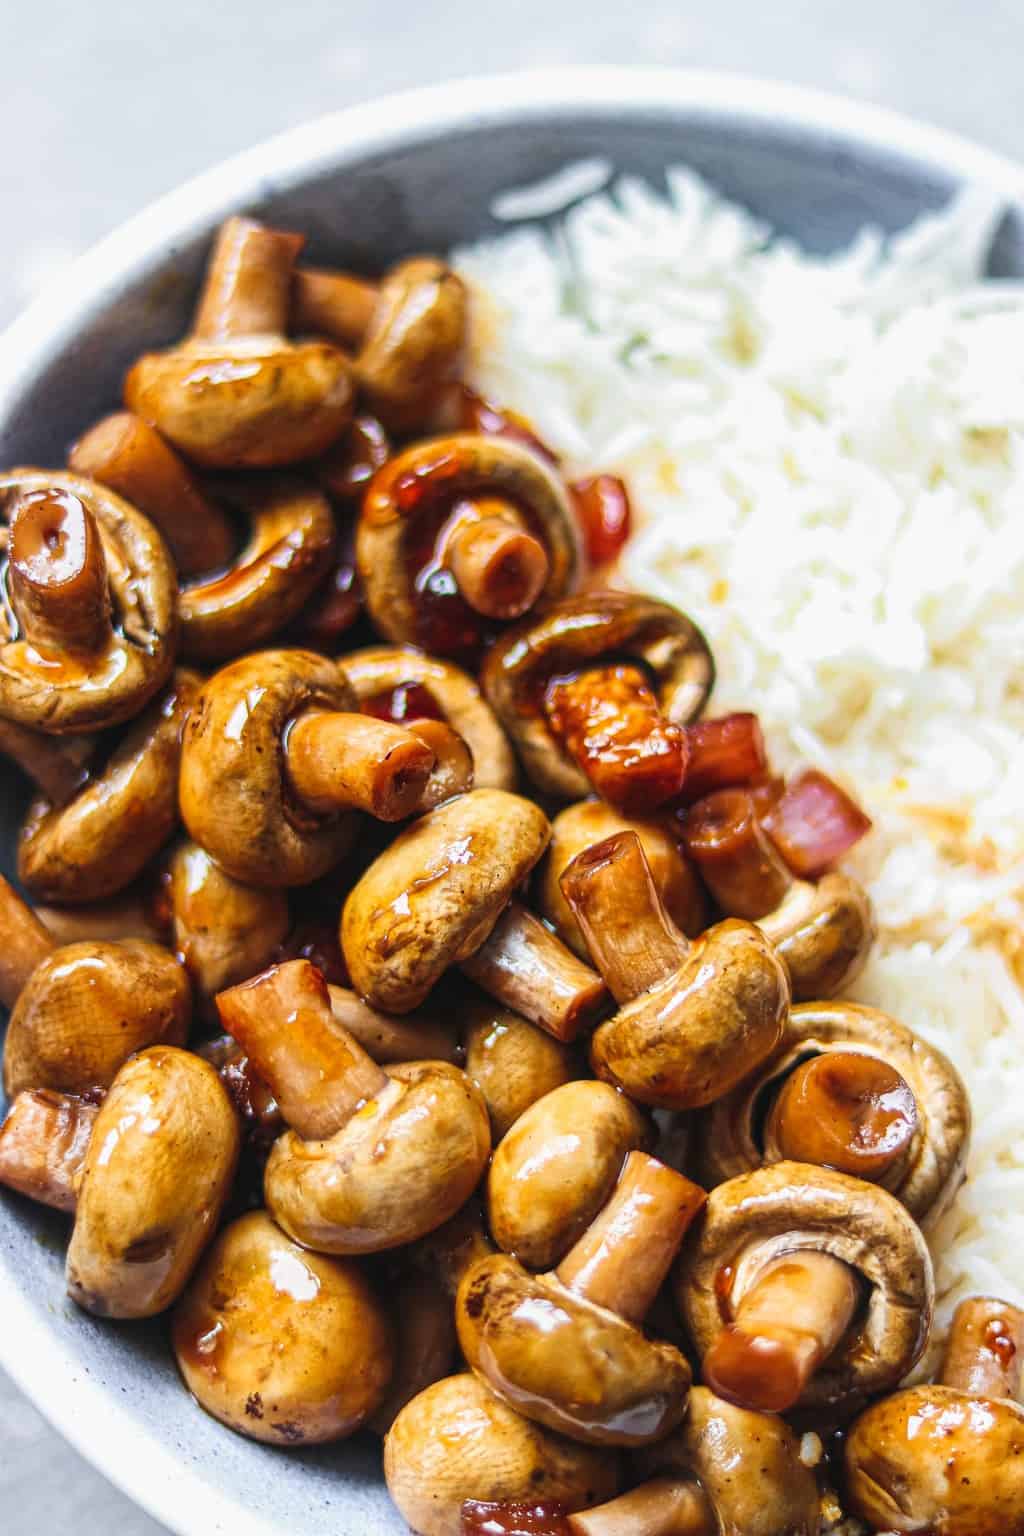 Glazed mushrooms and rice in a blue bowl